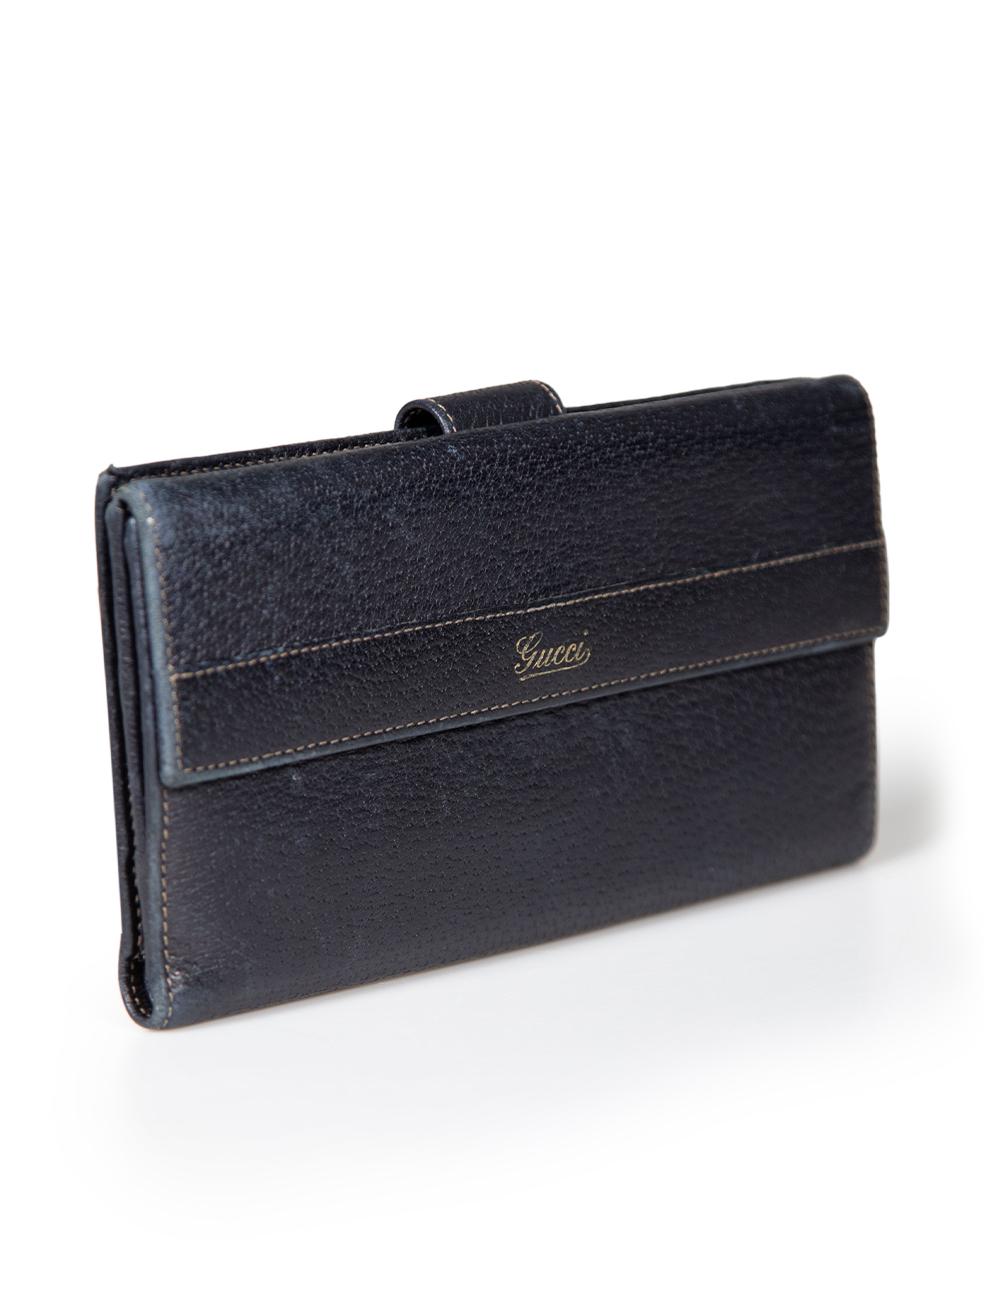 CONDITION is Good. Minor wear to wallet is evident. Light wear to the edges, corners and internal card holders with abrasion. Internal compartment edge has come undone on this used Gucci designer resale item.
 
 
 
 Details
 
 
 Navy
 
 Leather
 
